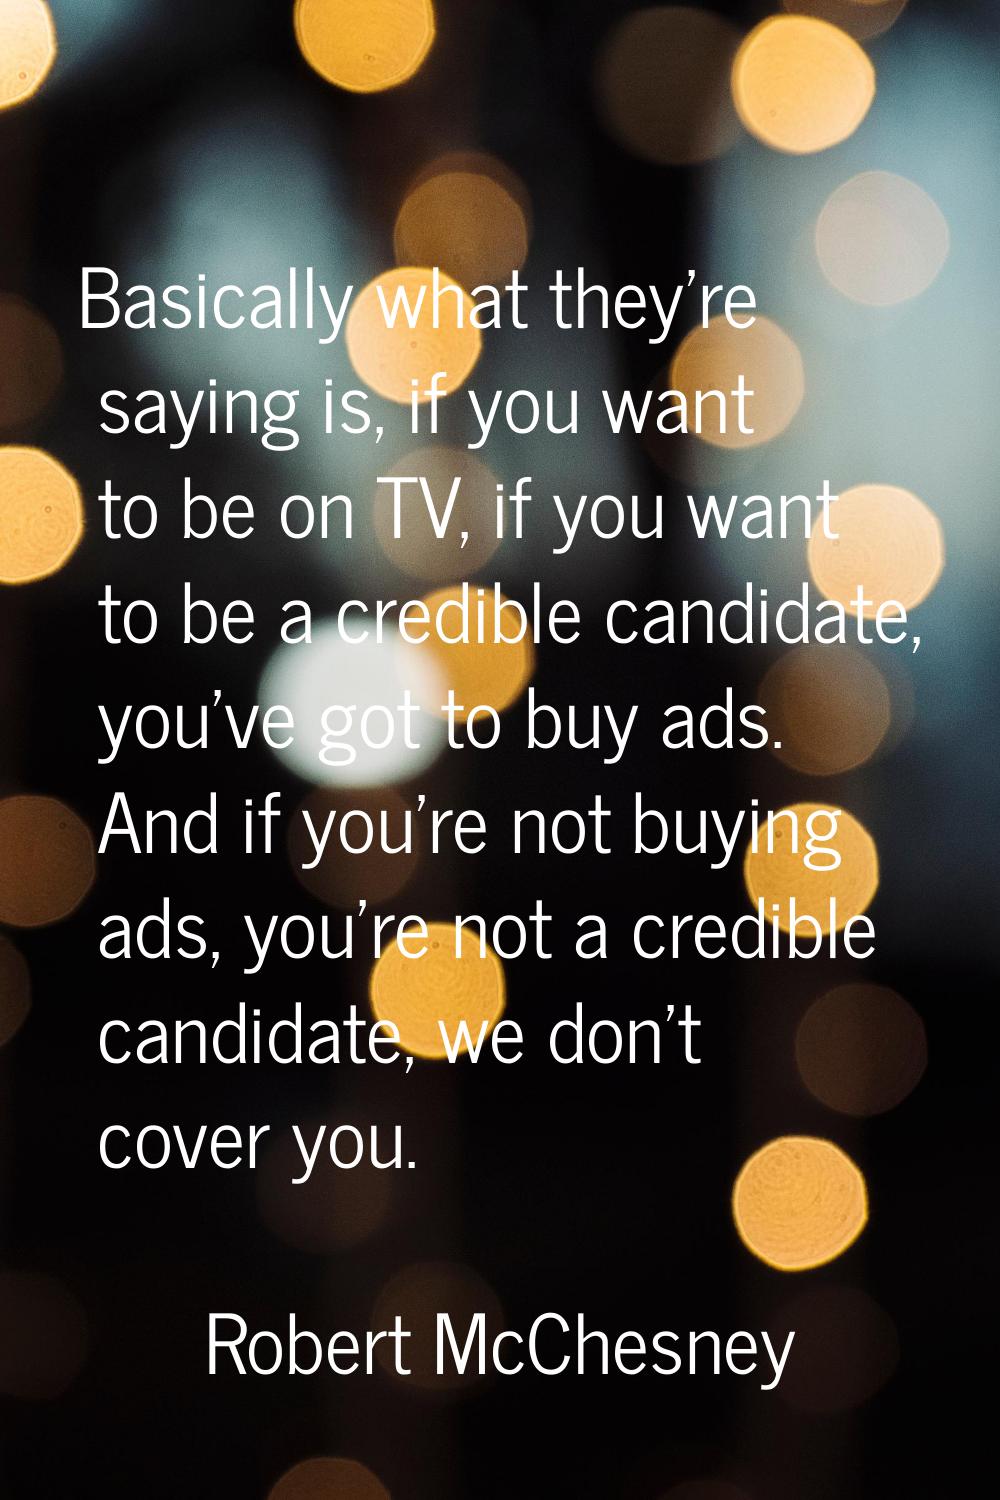 Basically what they're saying is, if you want to be on TV, if you want to be a credible candidate, 